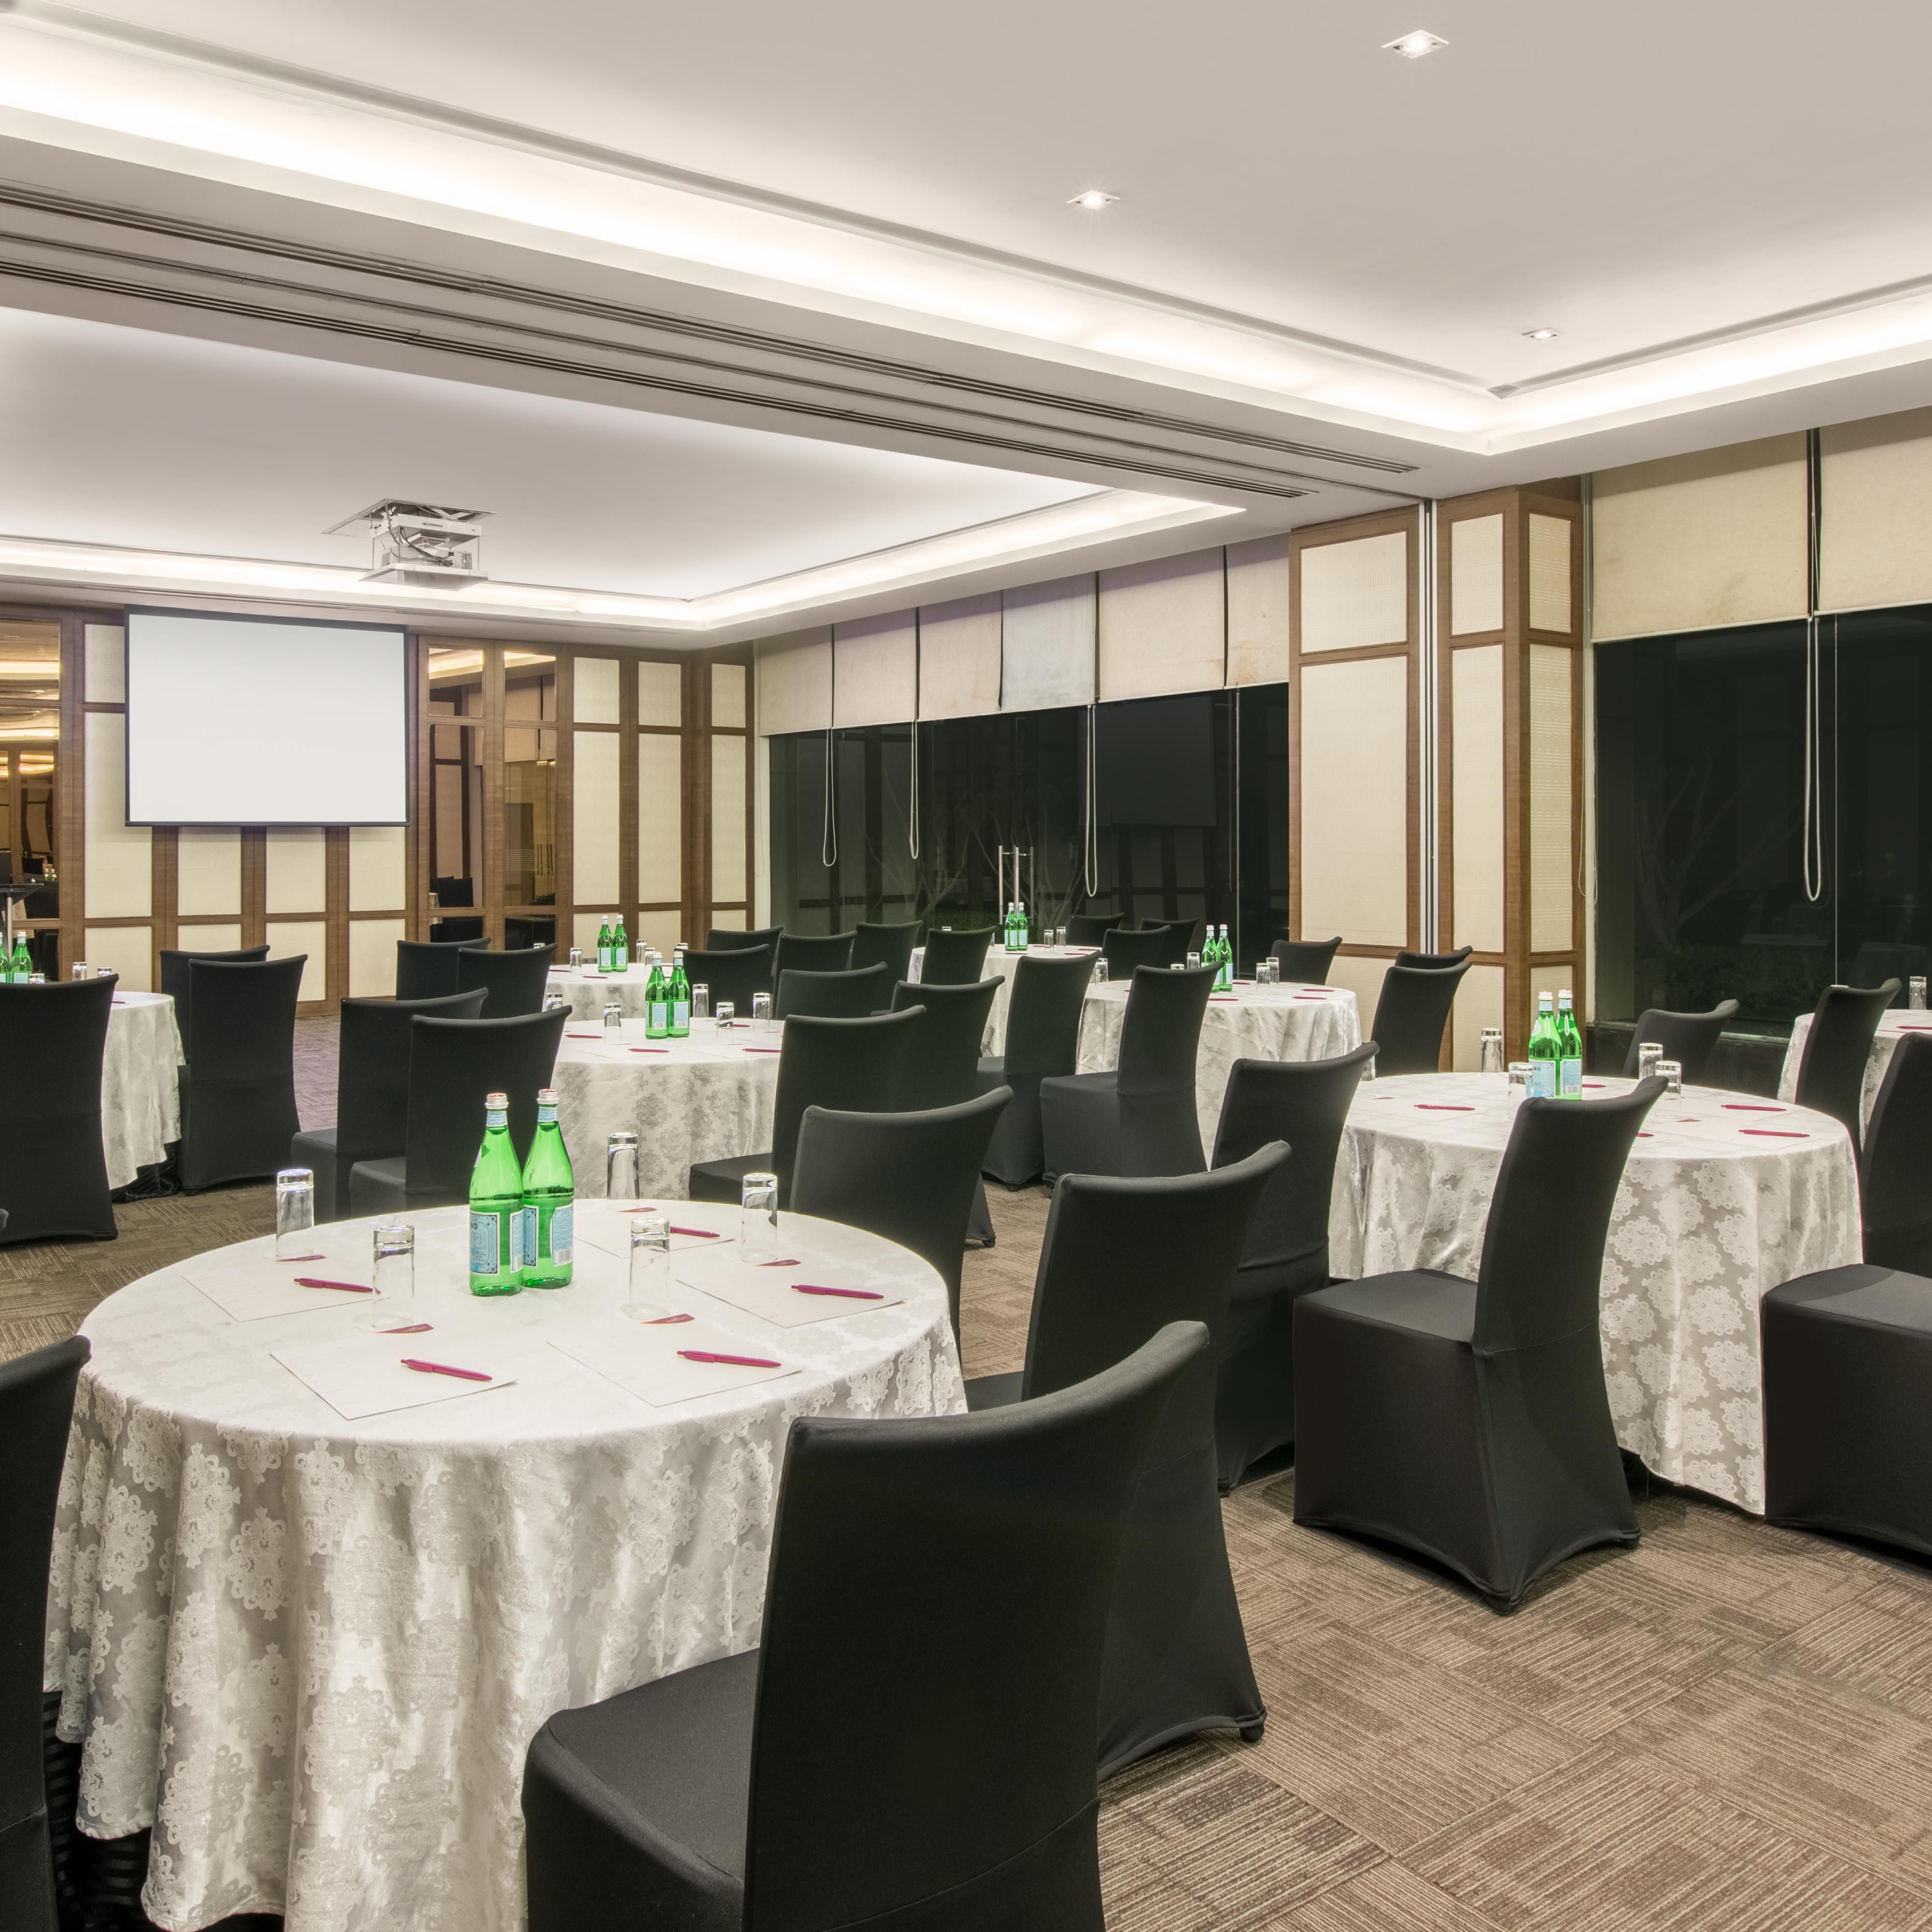 Pearl ballroom is best suited for small &amp; medium size meetings